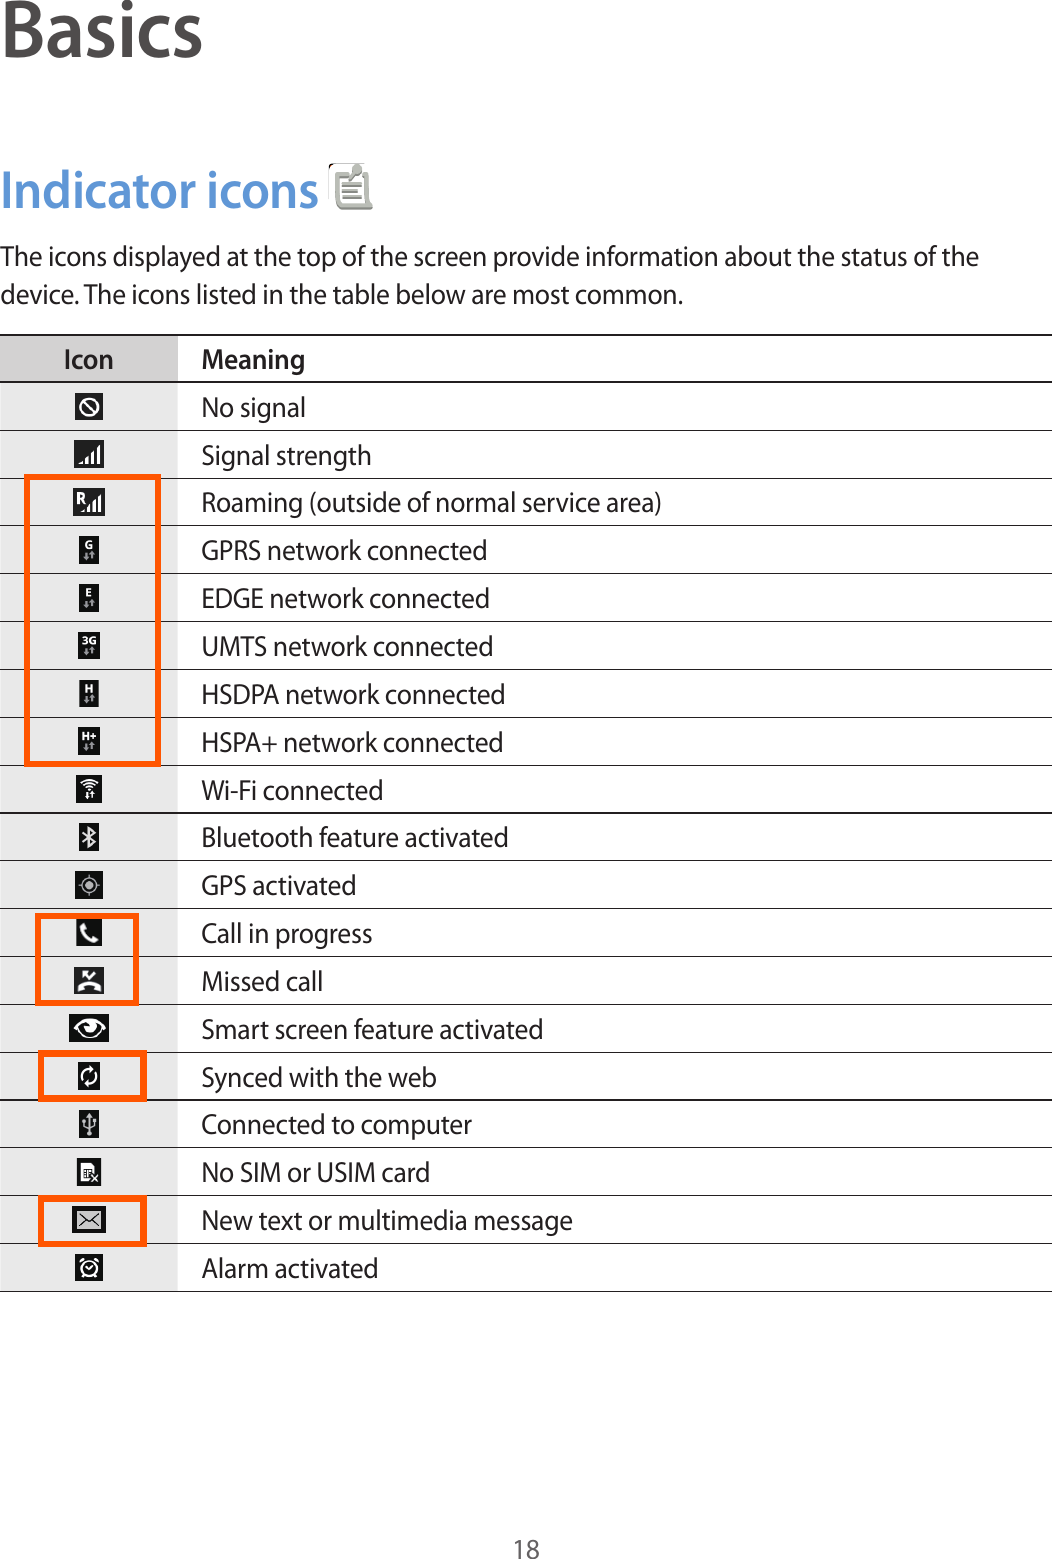 18BasicsIndicator iconsThe icons displayed at the top of the screen provide information about the status of the device. The icons listed in the table below are most common.Icon MeaningNo signalSignal strengthRoaming (outside of normal service area)GPRS network connectedEDGE network connectedUMTS network connectedHSDPA network connectedHSPA+ network connectedWi-Fi connectedBluetooth feature activatedGPS activatedCall in progressMissed callSmart screen feature activatedSynced with the webConnected to computerNo SIM or USIM cardNew text or multimedia messageAlarm activated